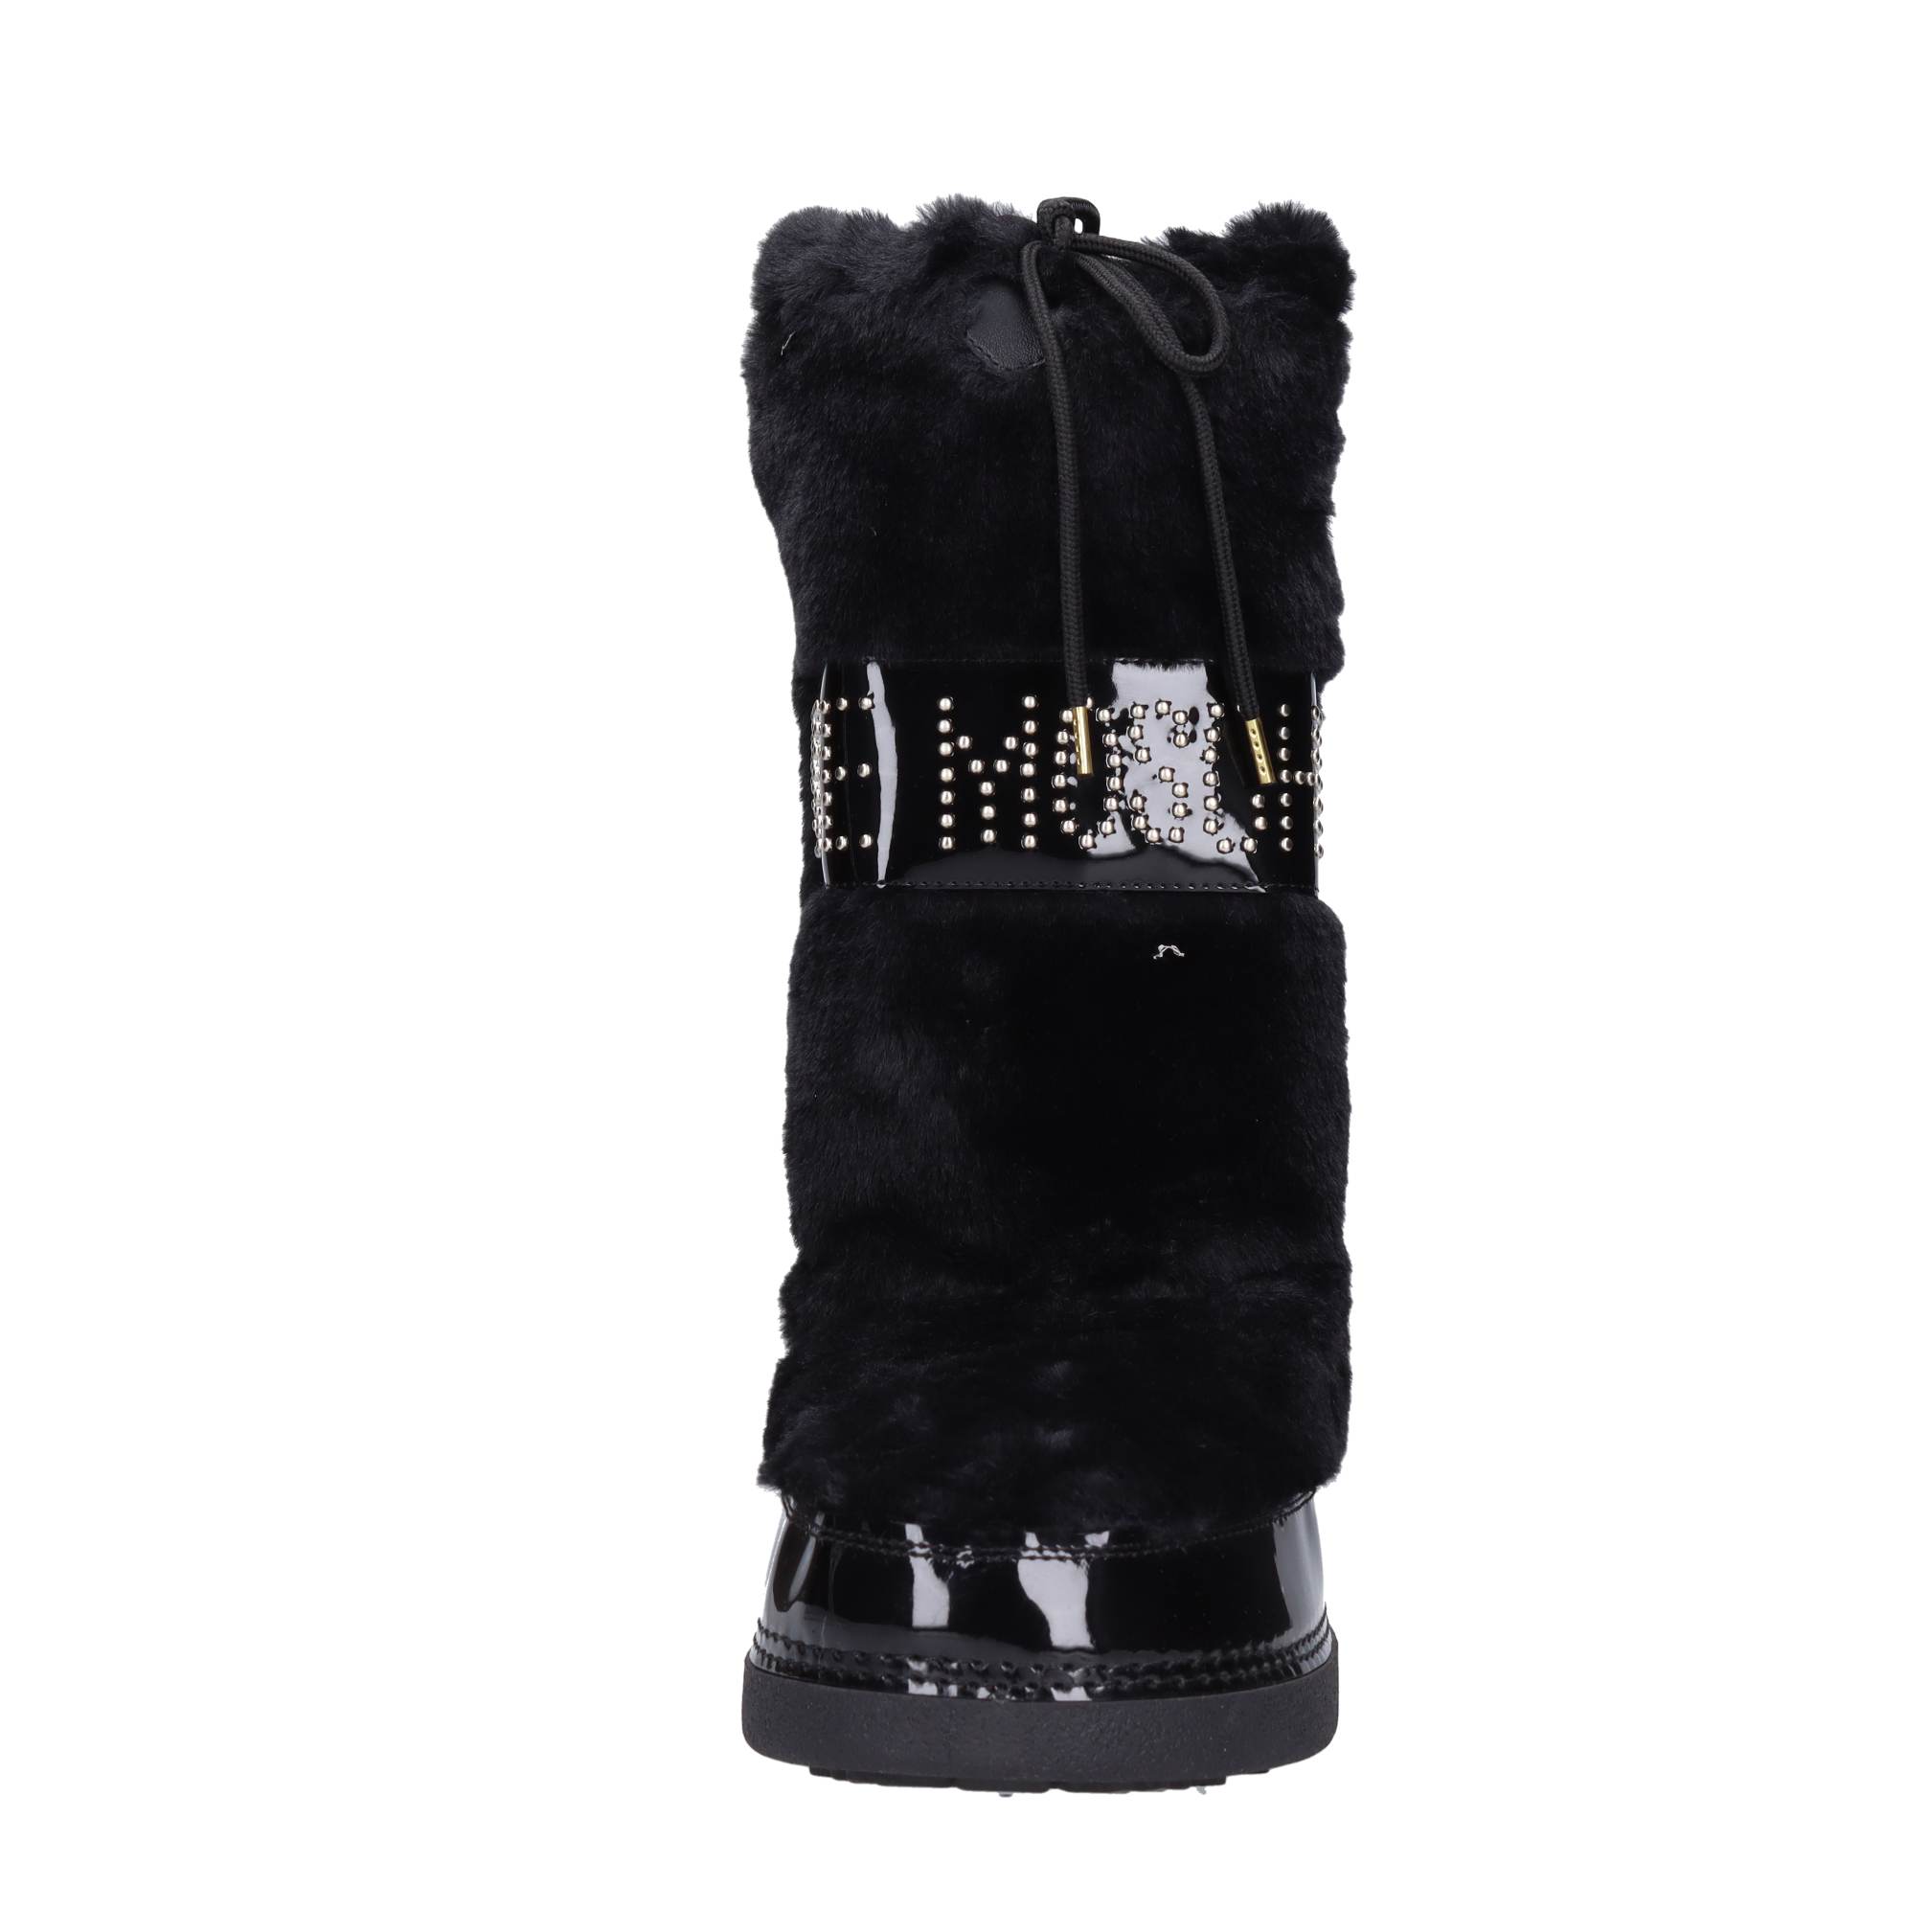 Faux fur and patent leather Après-ski boots - LOVE MOSCHINO - Ginevra  calzature